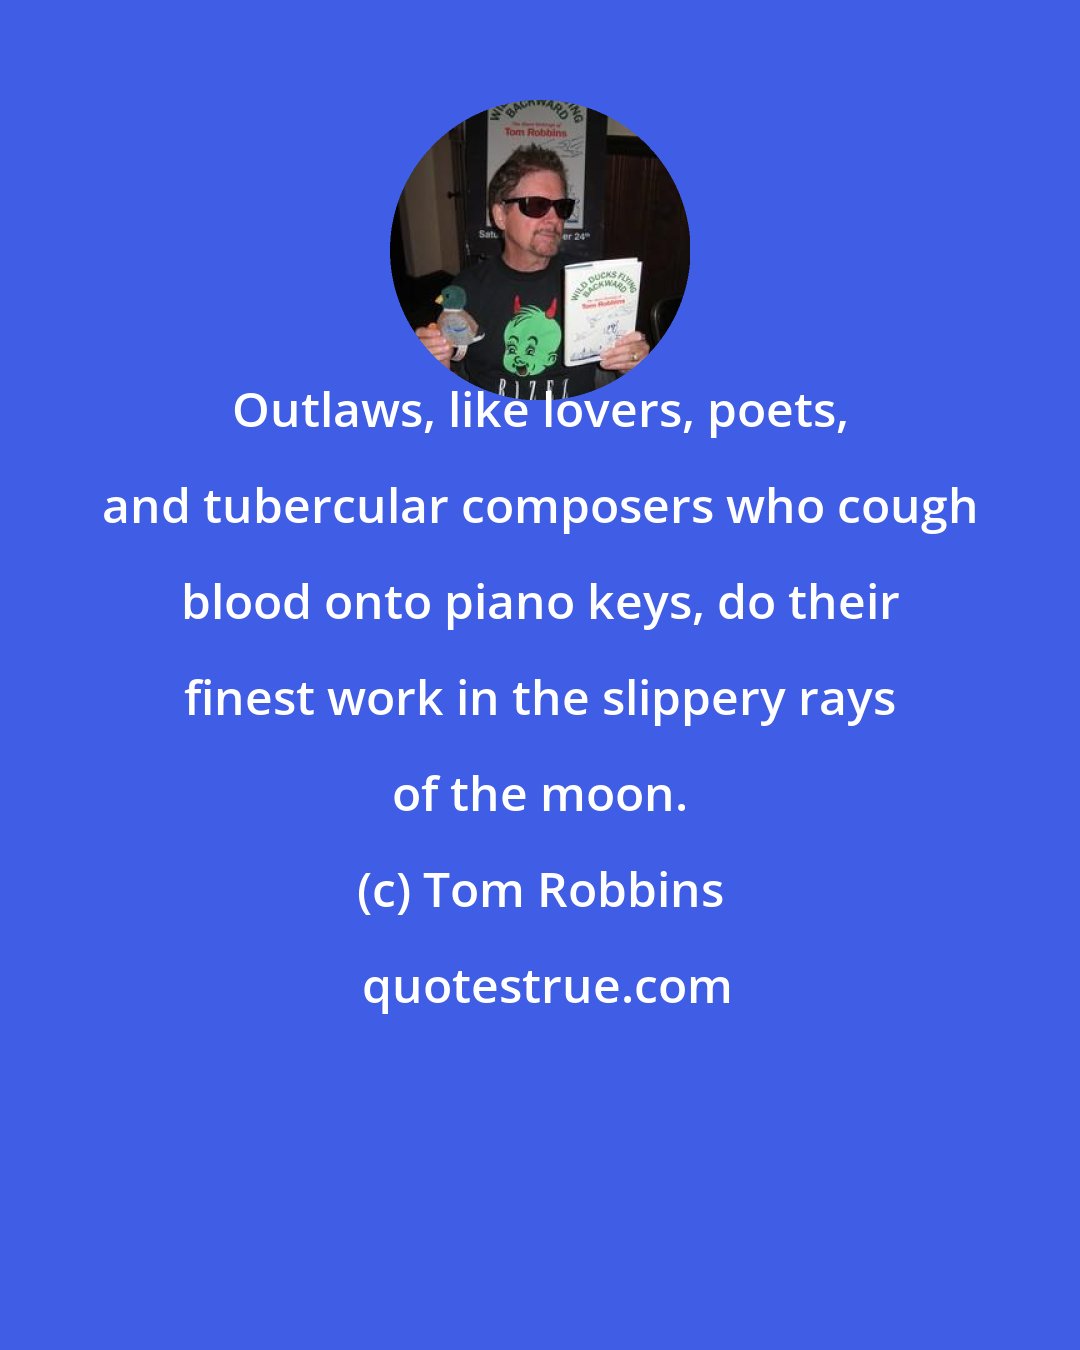 Tom Robbins: Outlaws, like lovers, poets, and tubercular composers who cough blood onto piano keys, do their finest work in the slippery rays of the moon.